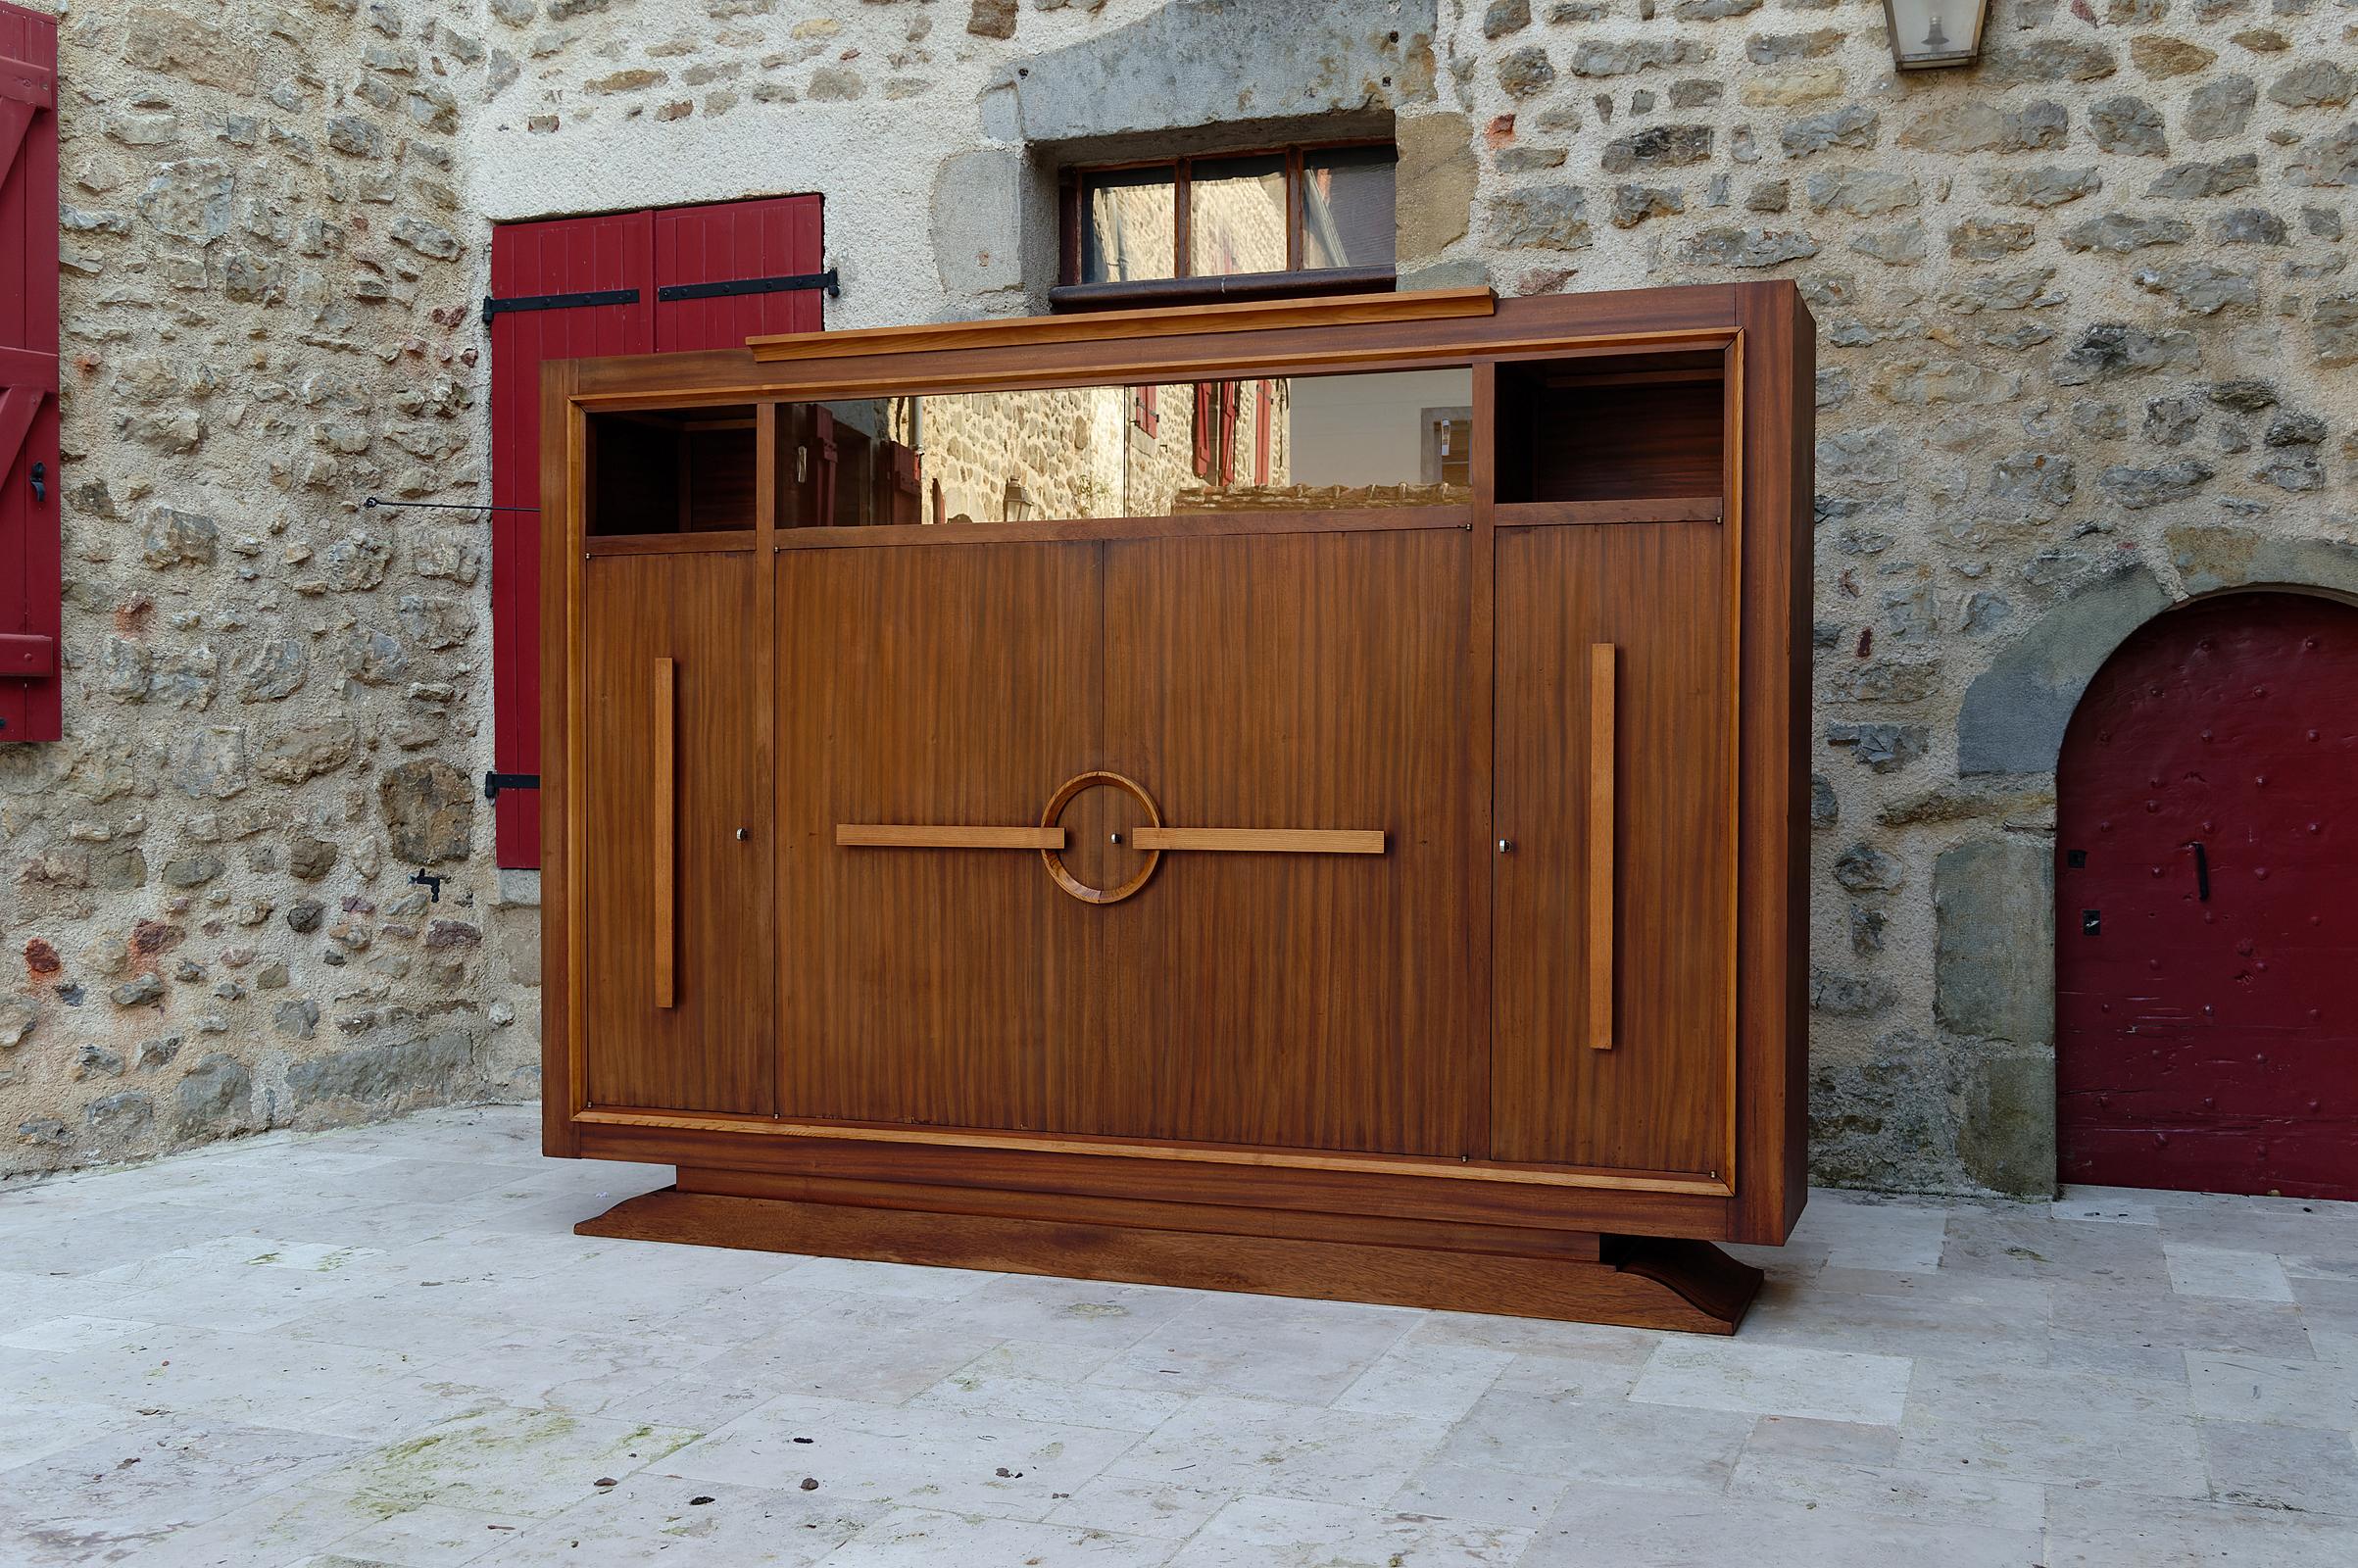 Modernist Art Deco bookcase / cabinet, Attributed to Auguste Vallin, France, Circa 1930

Important bookcase / cabinet consisting of a central cupboard with double door, 2 side cupboards and 1 showcase part at the top with double sliding glass